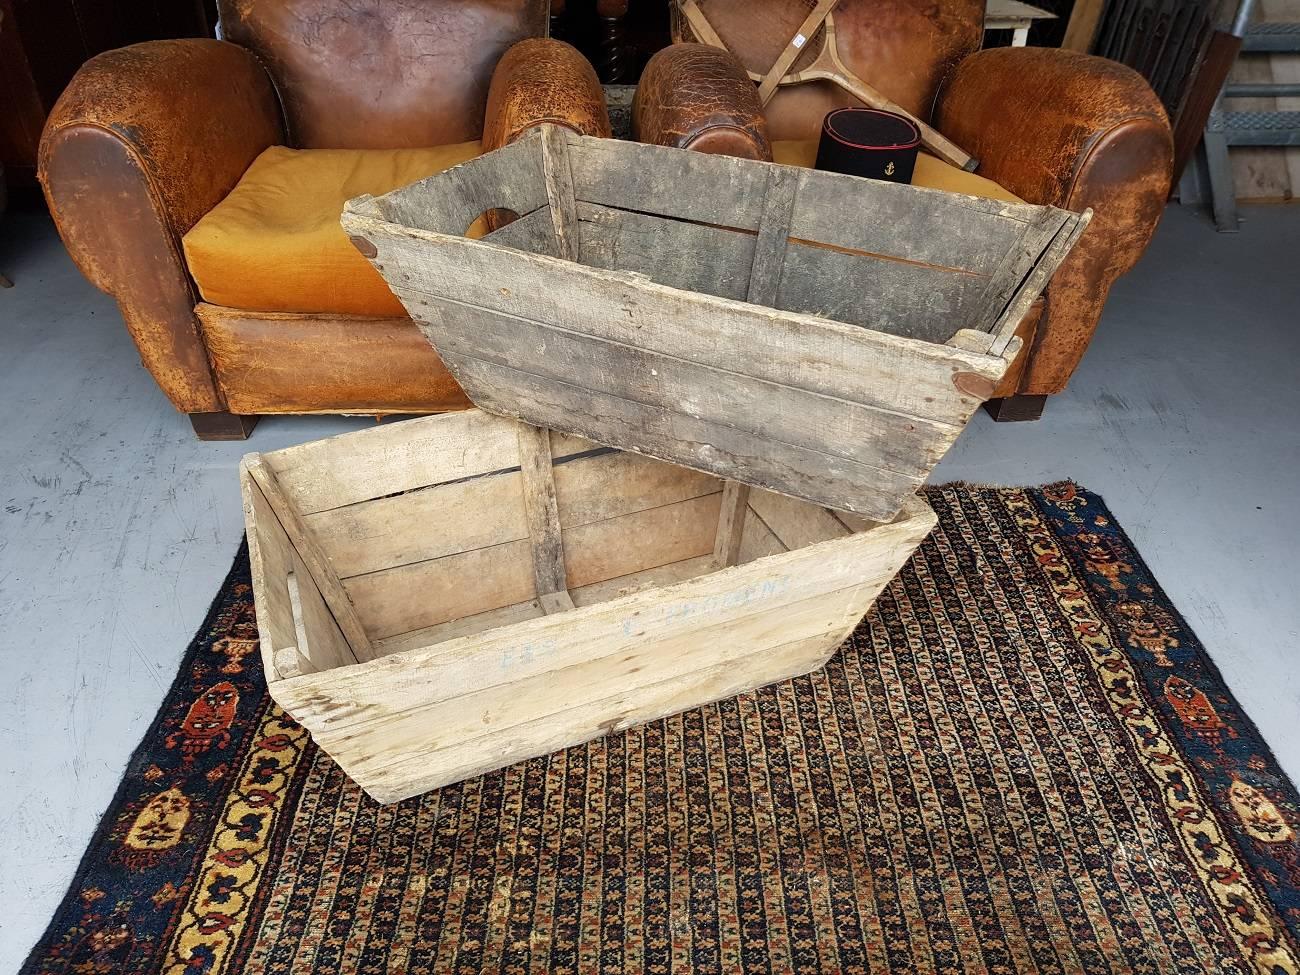 Vintage French rural wooden grape crates from the Drôme region of France, circa 1960-1970.

The measurements are,
Depth 48 cm/ 18.8 inch.
Width 78 cm/ 30.7 inch.
Height 31 cm/ 12.2 inch.
     